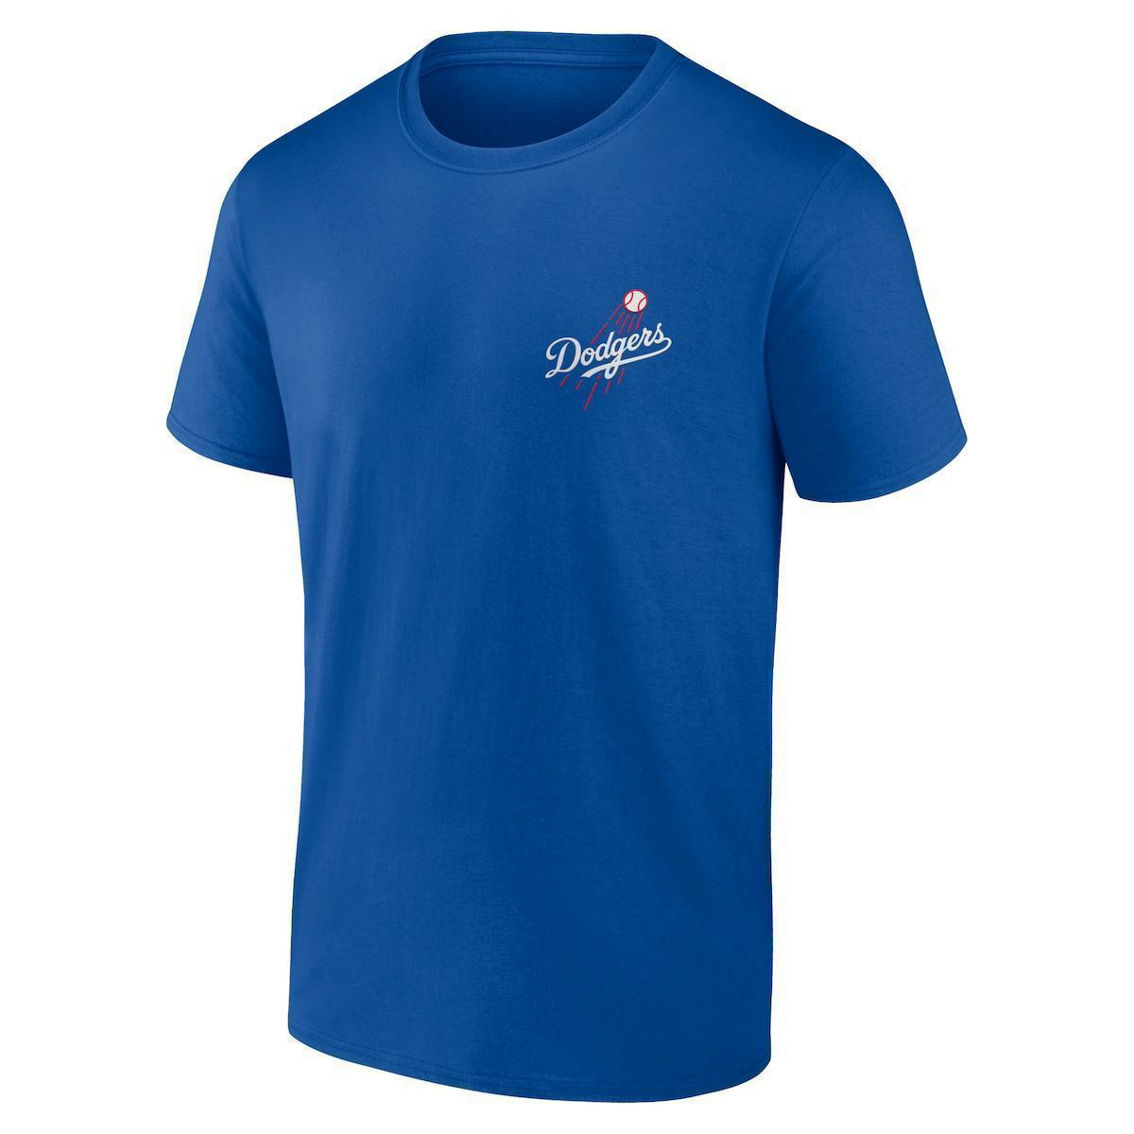 Fanatics Branded Men's Royal Los Angeles Dodgers Iconic Bring It T-Shirt - Image 3 of 4